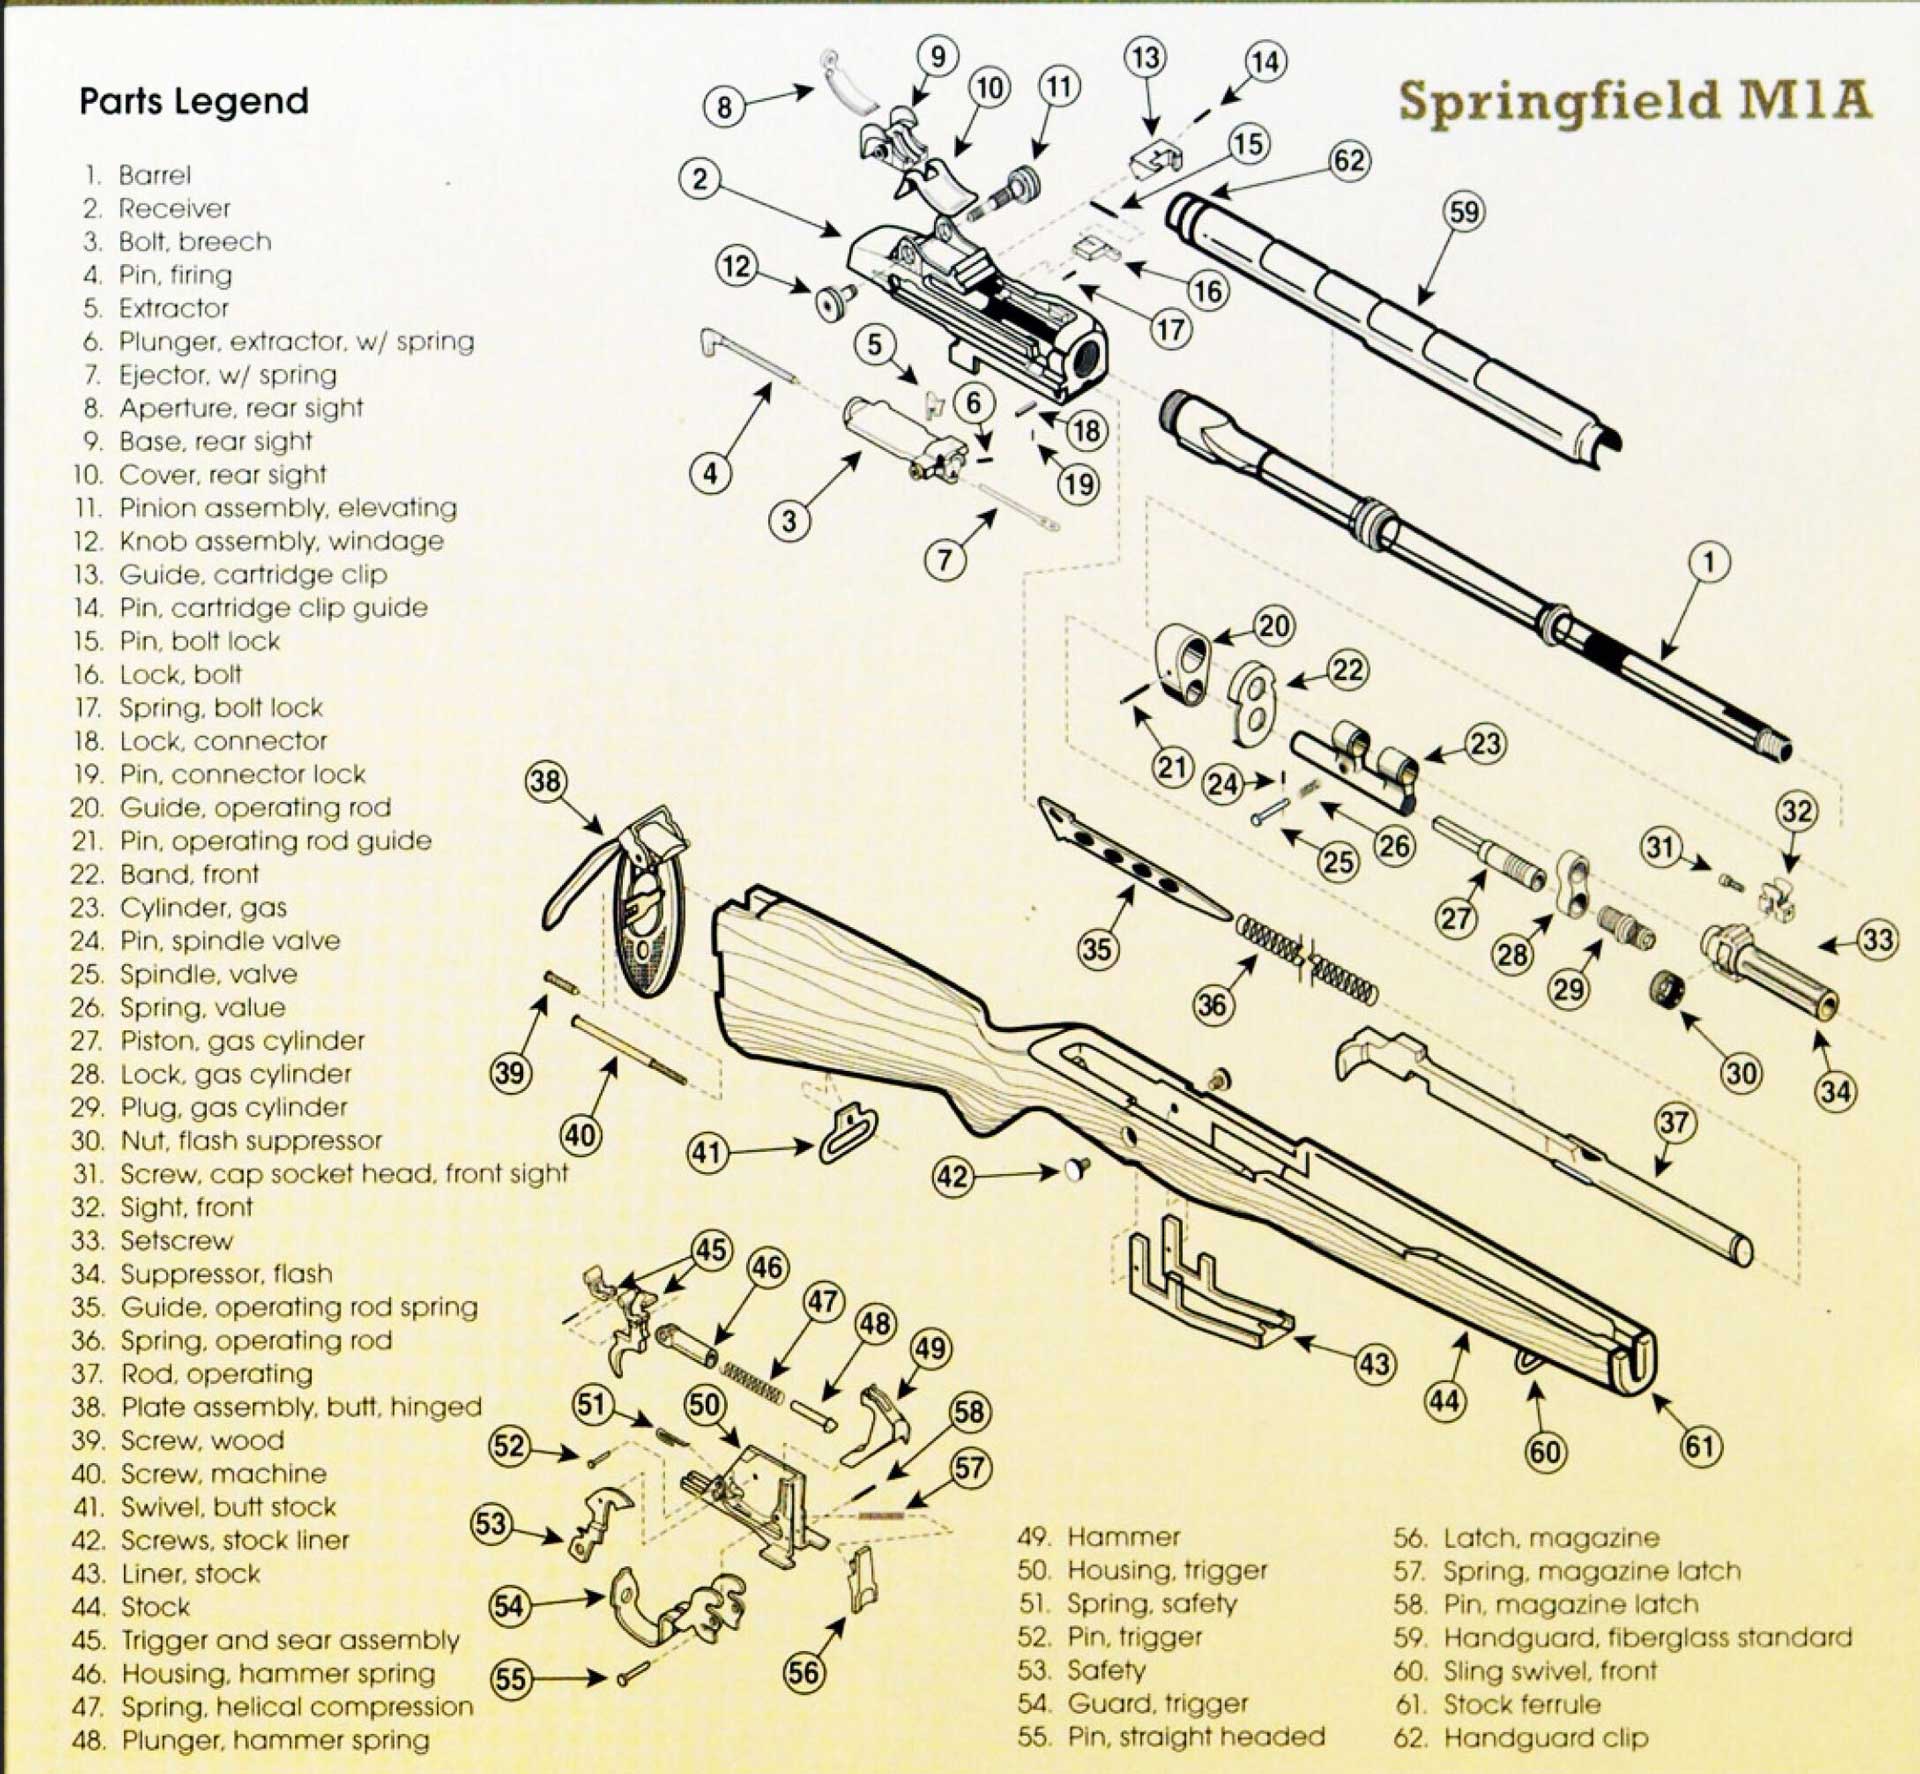 drawing schematic rifle parts text on image noting parts